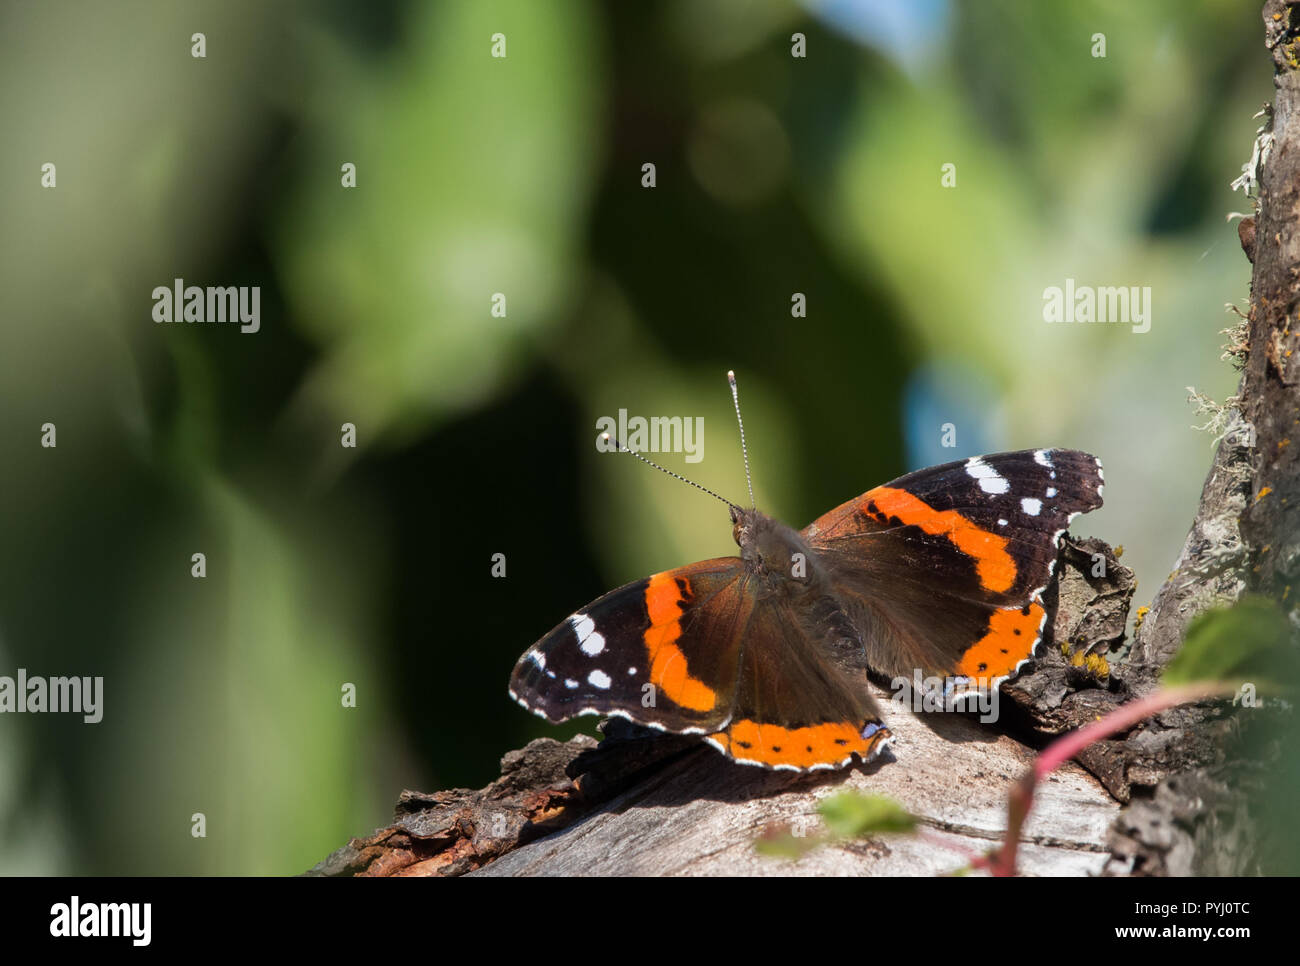 A Red Admirable butterfly (Vanessa atalanta) resting on a tree limb, with green background. Stock Photo